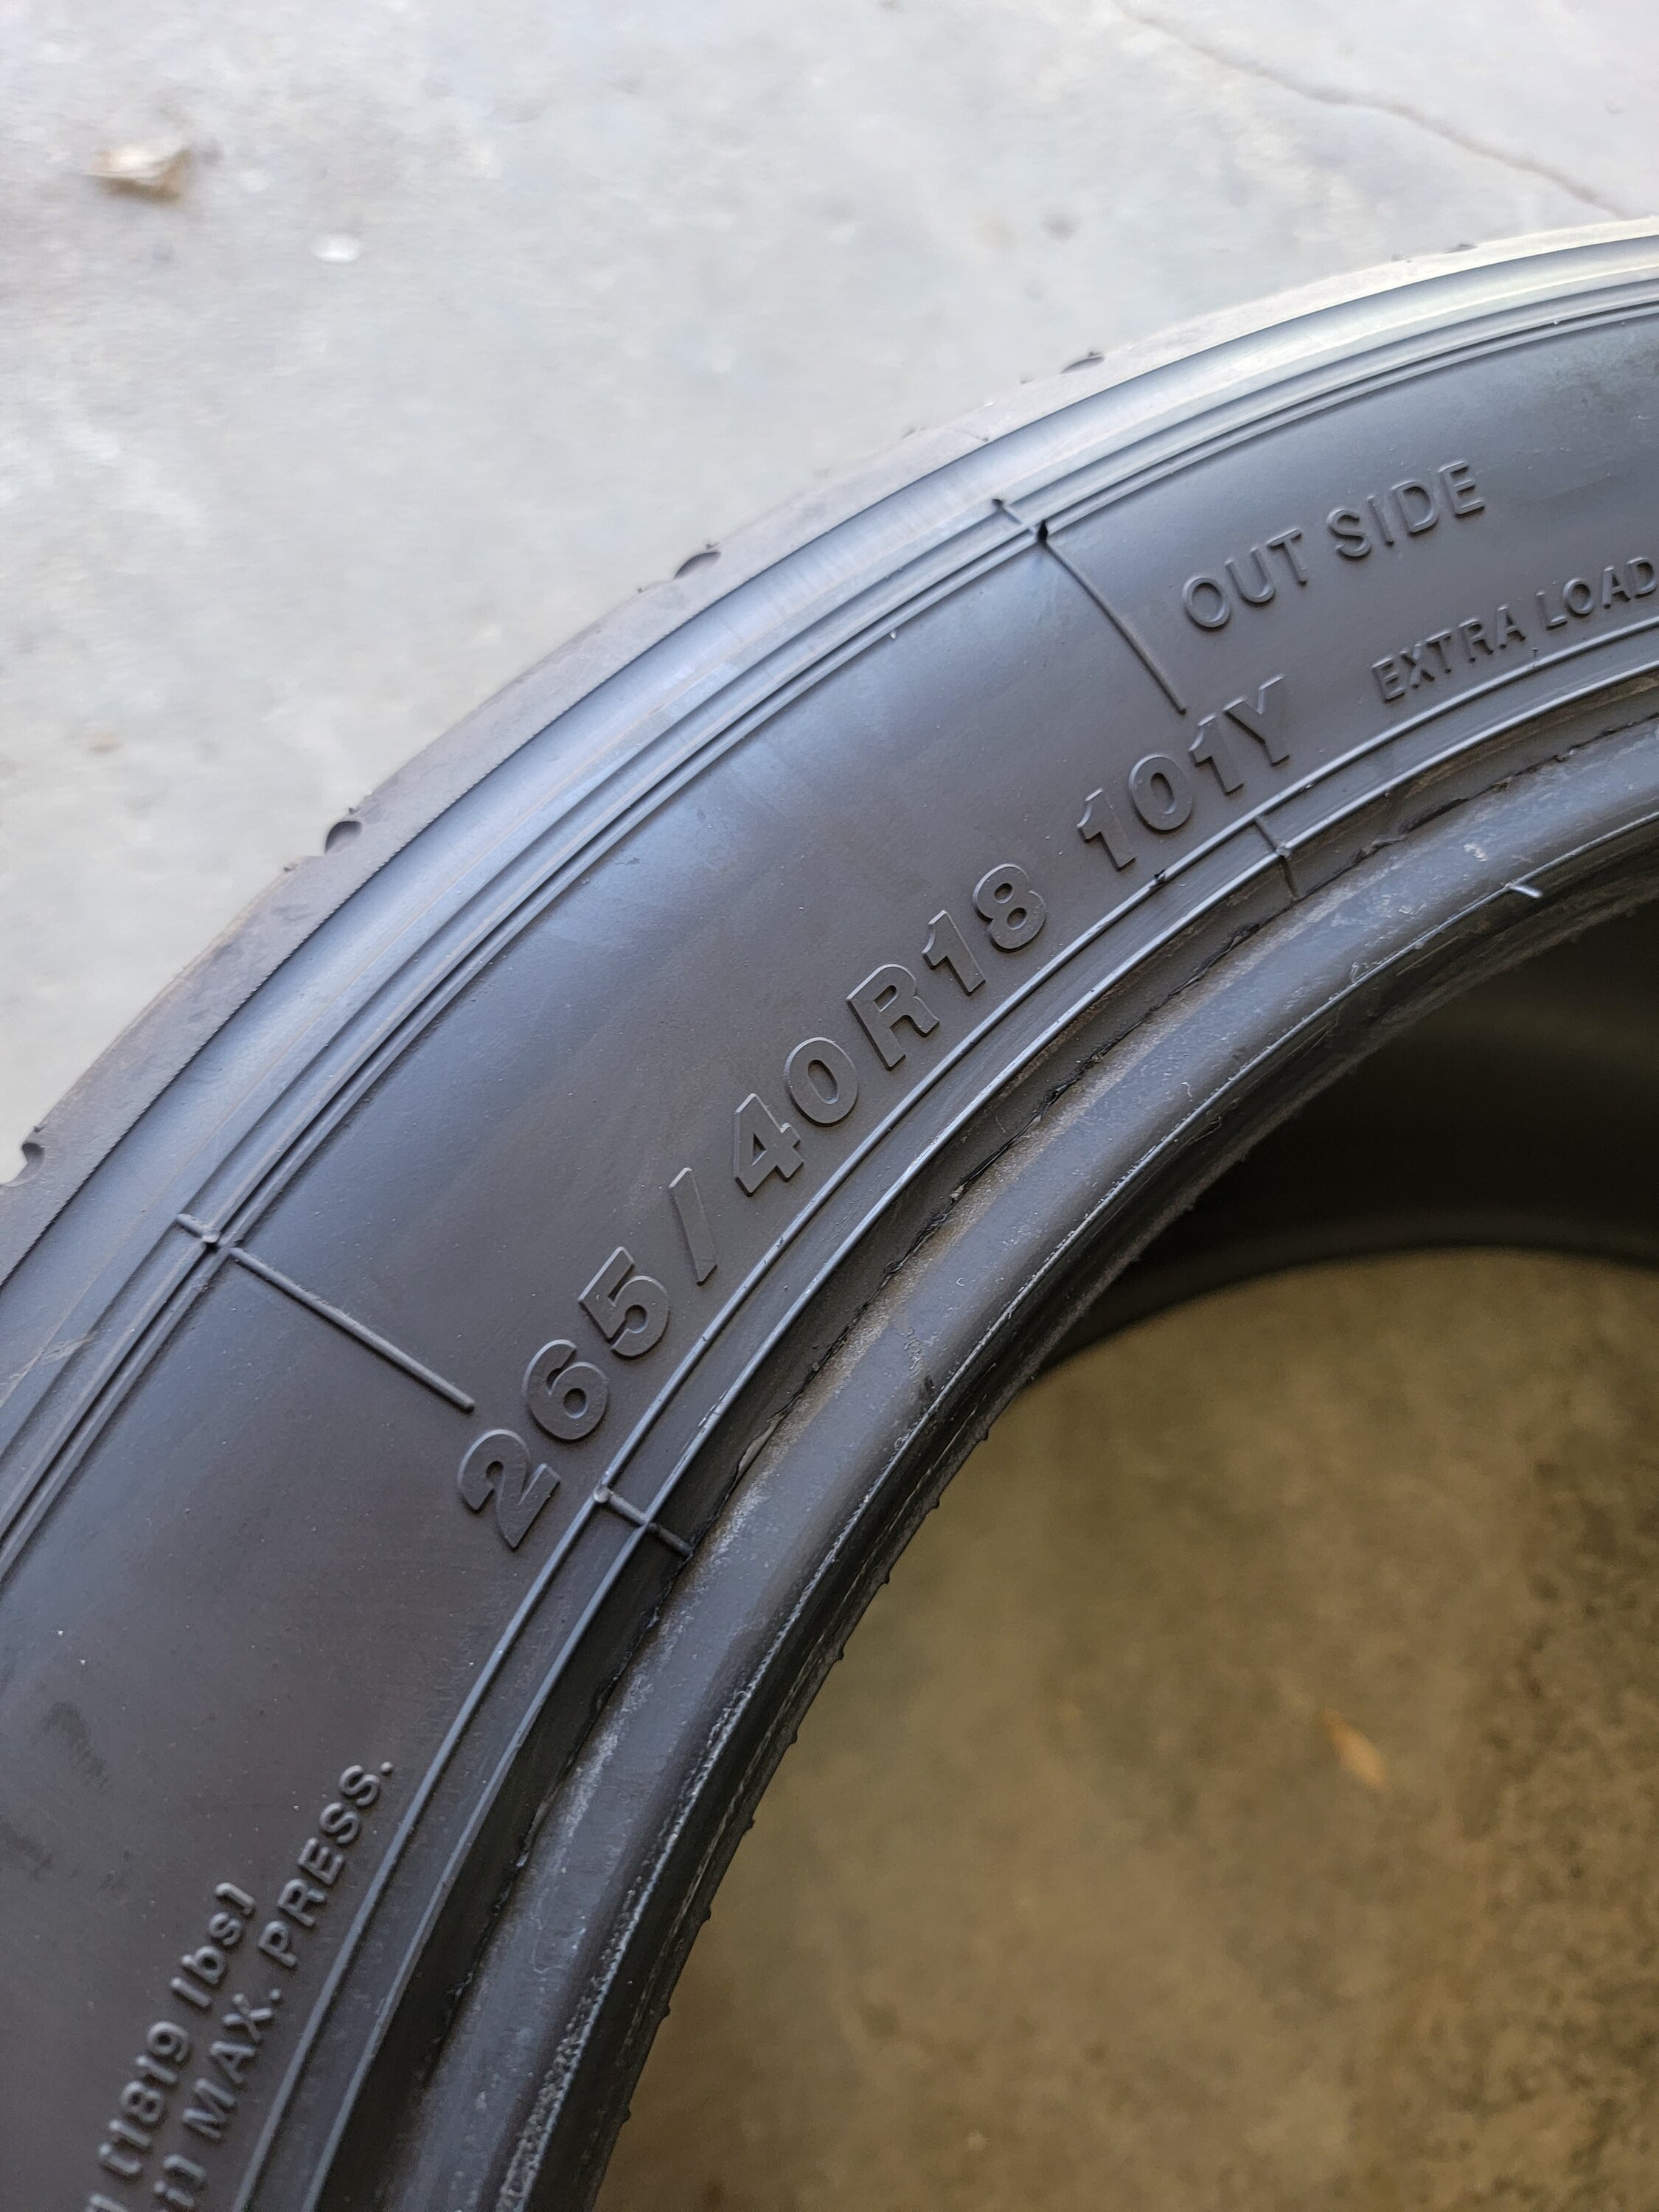 11th Gen Honda Civic Advan a052 tires - 265/40/18 - Used for 600 miles! 20231016_134215